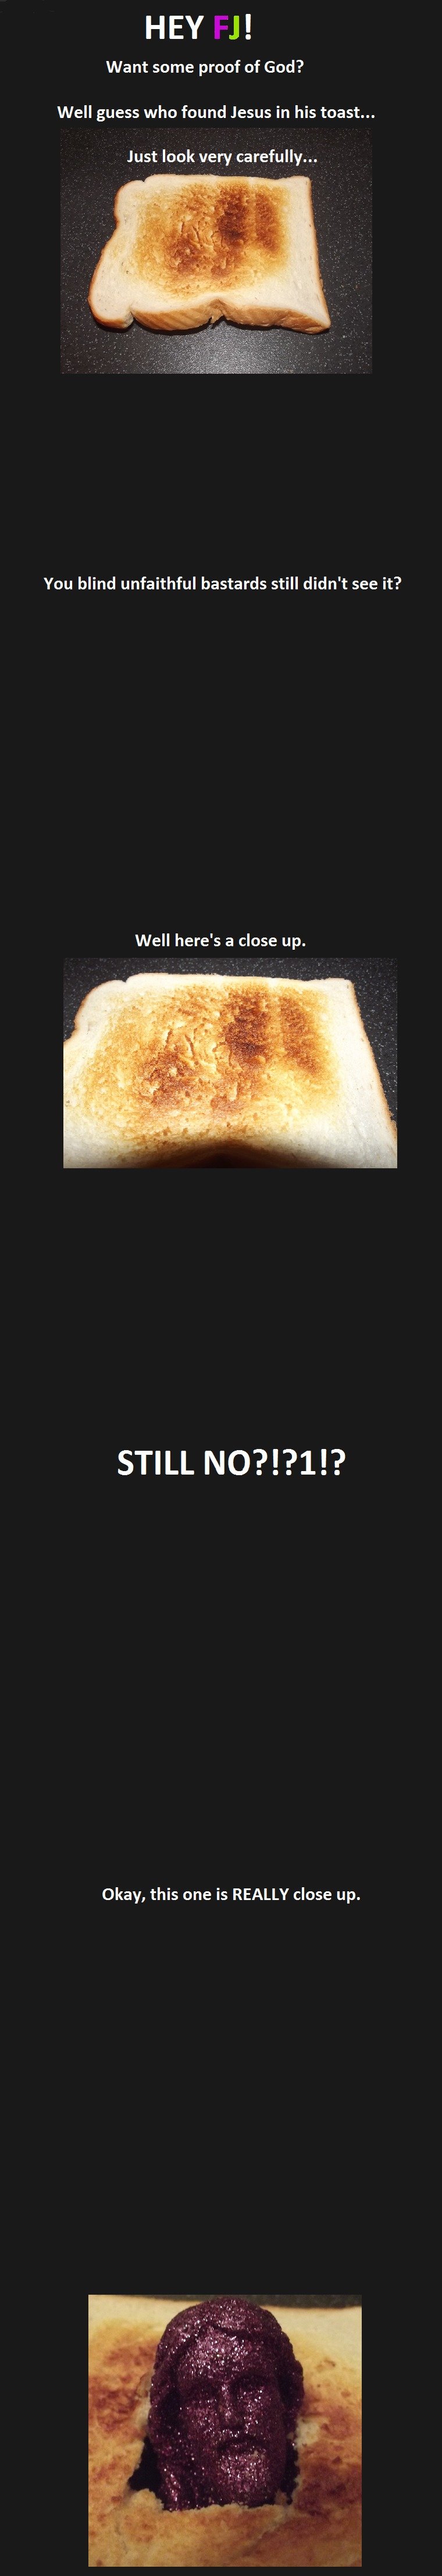 Hey Fj! Want some proof of God? Well guess who found Jesus in his toast... Just look very carefully... You blind unfaithful bastards still didn't see it? Well here's a close up. Still No?!?1!? Okay, this one is Really close up.